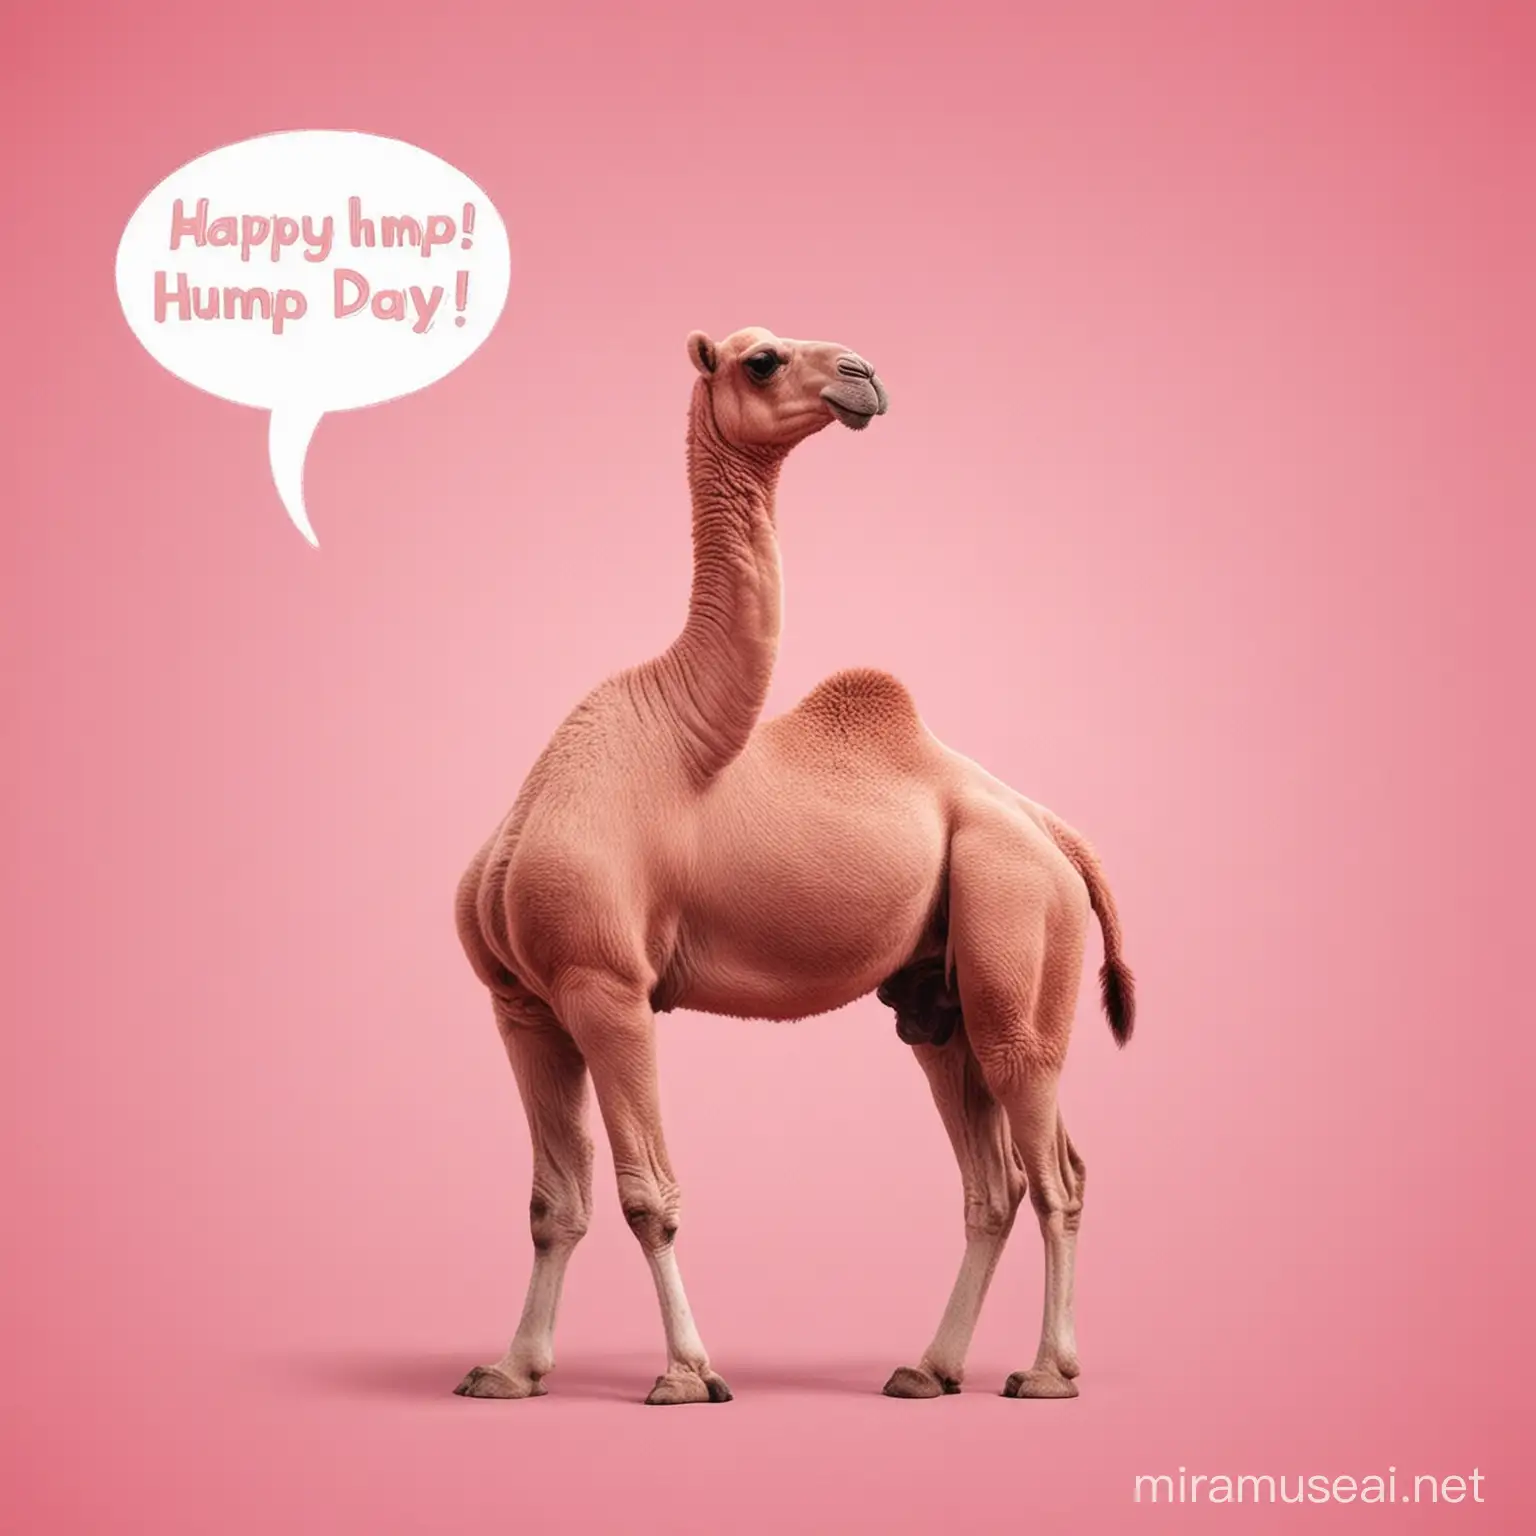 Playful Pink Camel Celebrates Midweek with Cheerful Greeting